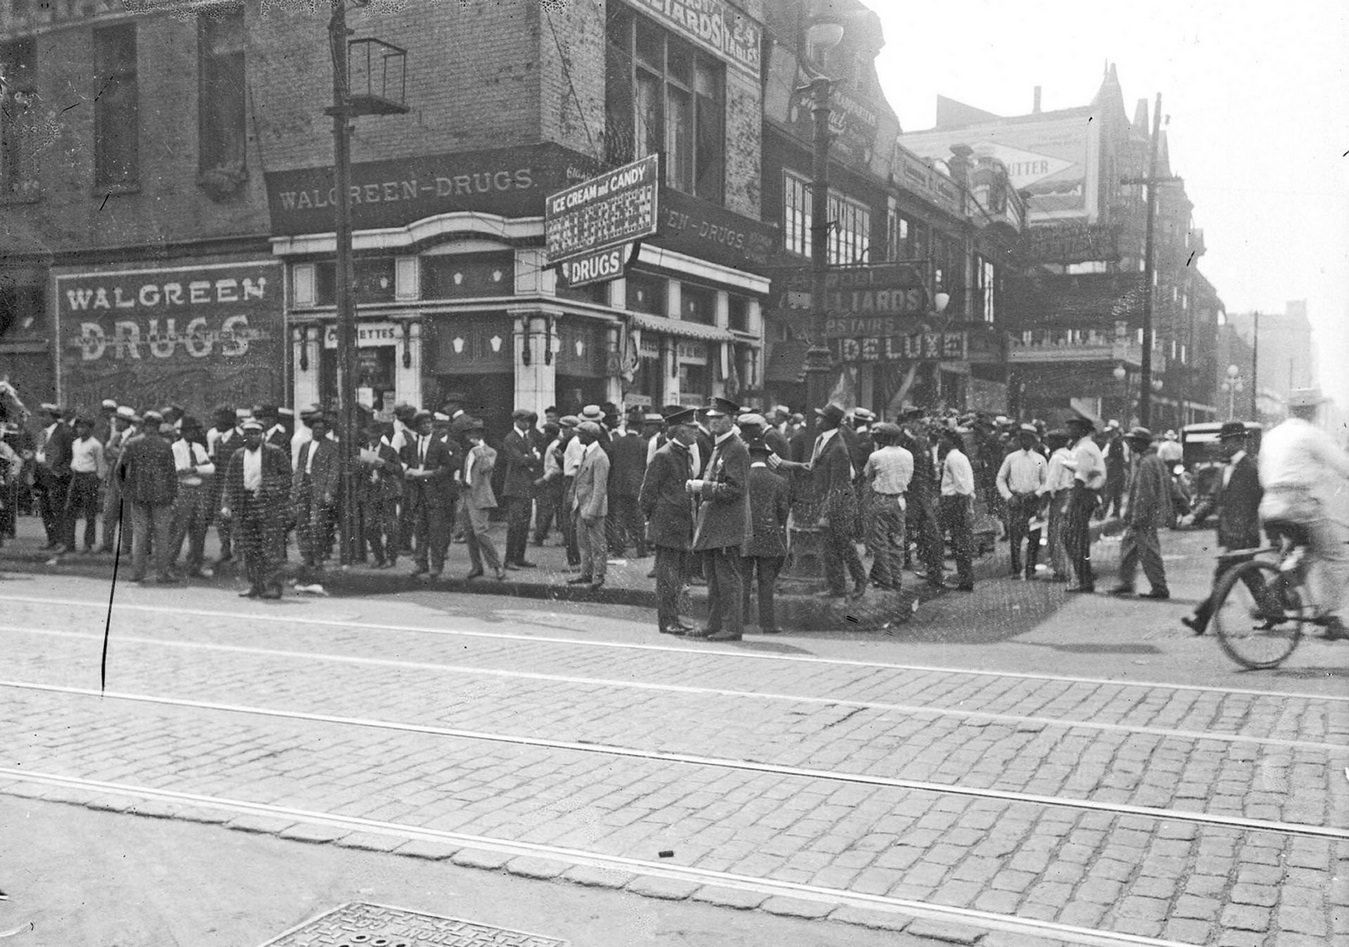 Chicago race riot, African American men standing in front of Walgreen Drugs, 35th and State, Chicago, Illinois, July 30, 1919.